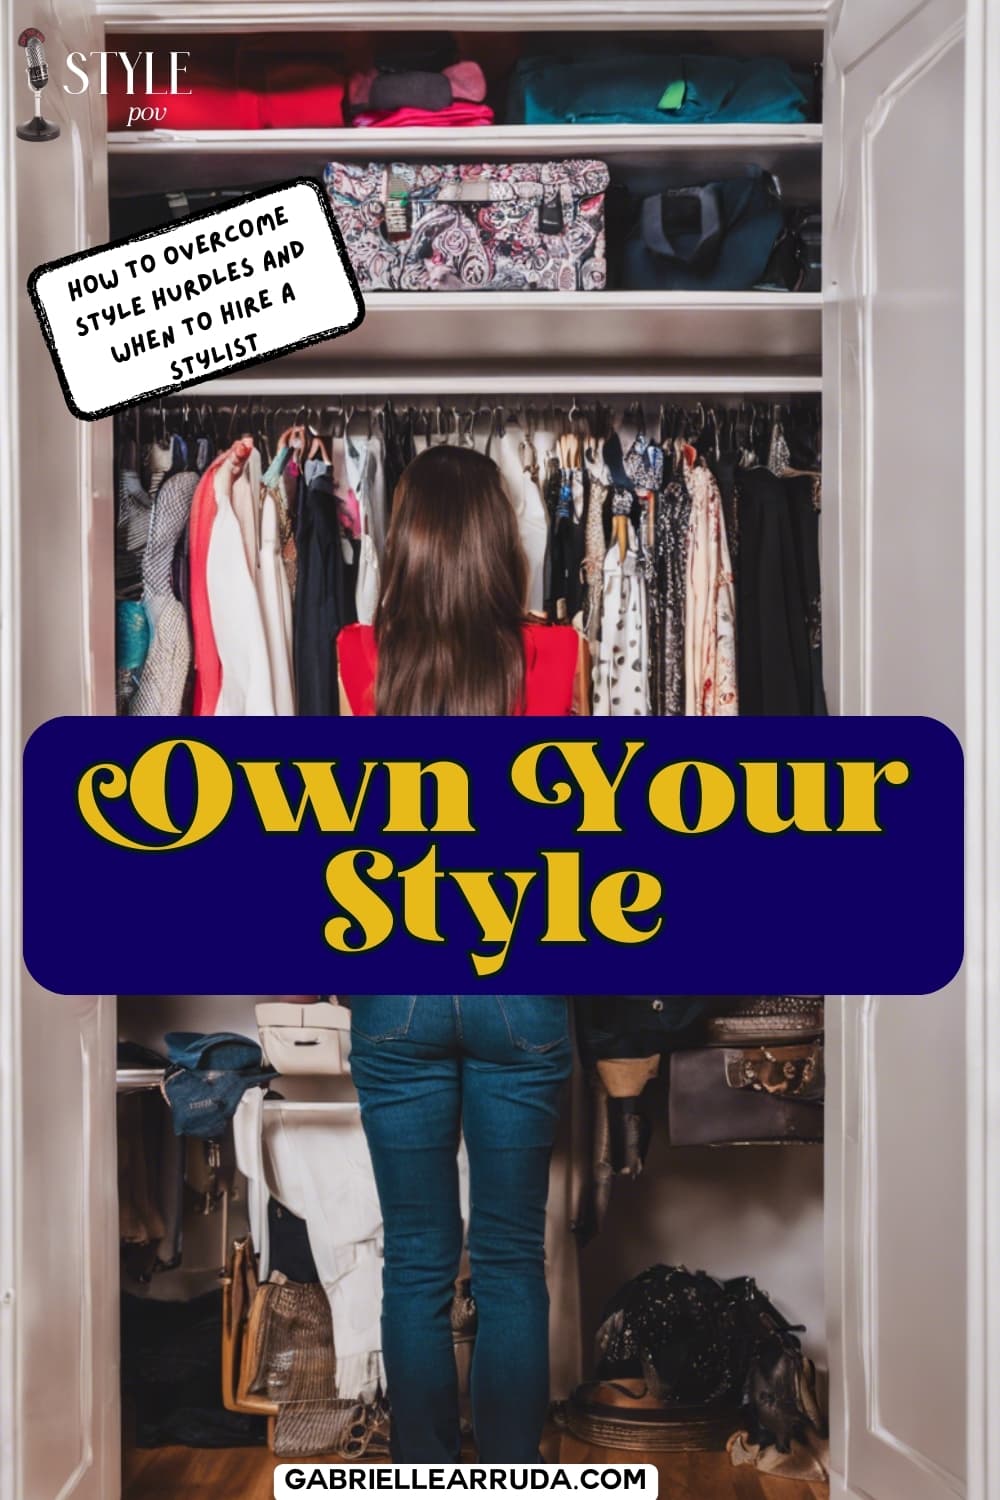 own your own style, with woman looking at closet. learn to overcome style hurdles and when to hire a stylist for help